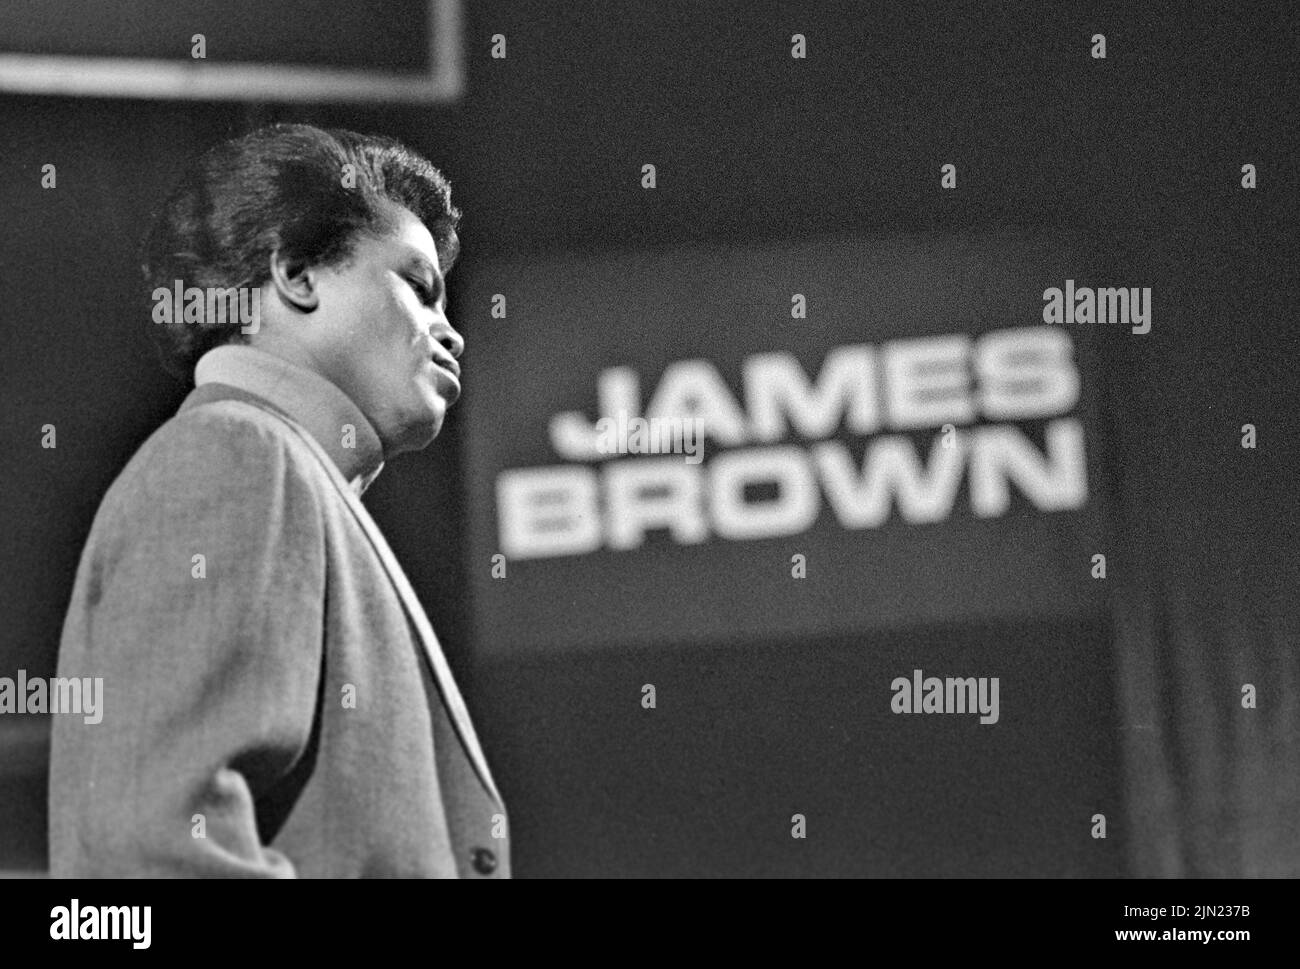 JAMES BROWN (1933-2006) American Soul singer on Ready,Steady, Go ! in 1966. Photo: Tony Gale Stock Photo